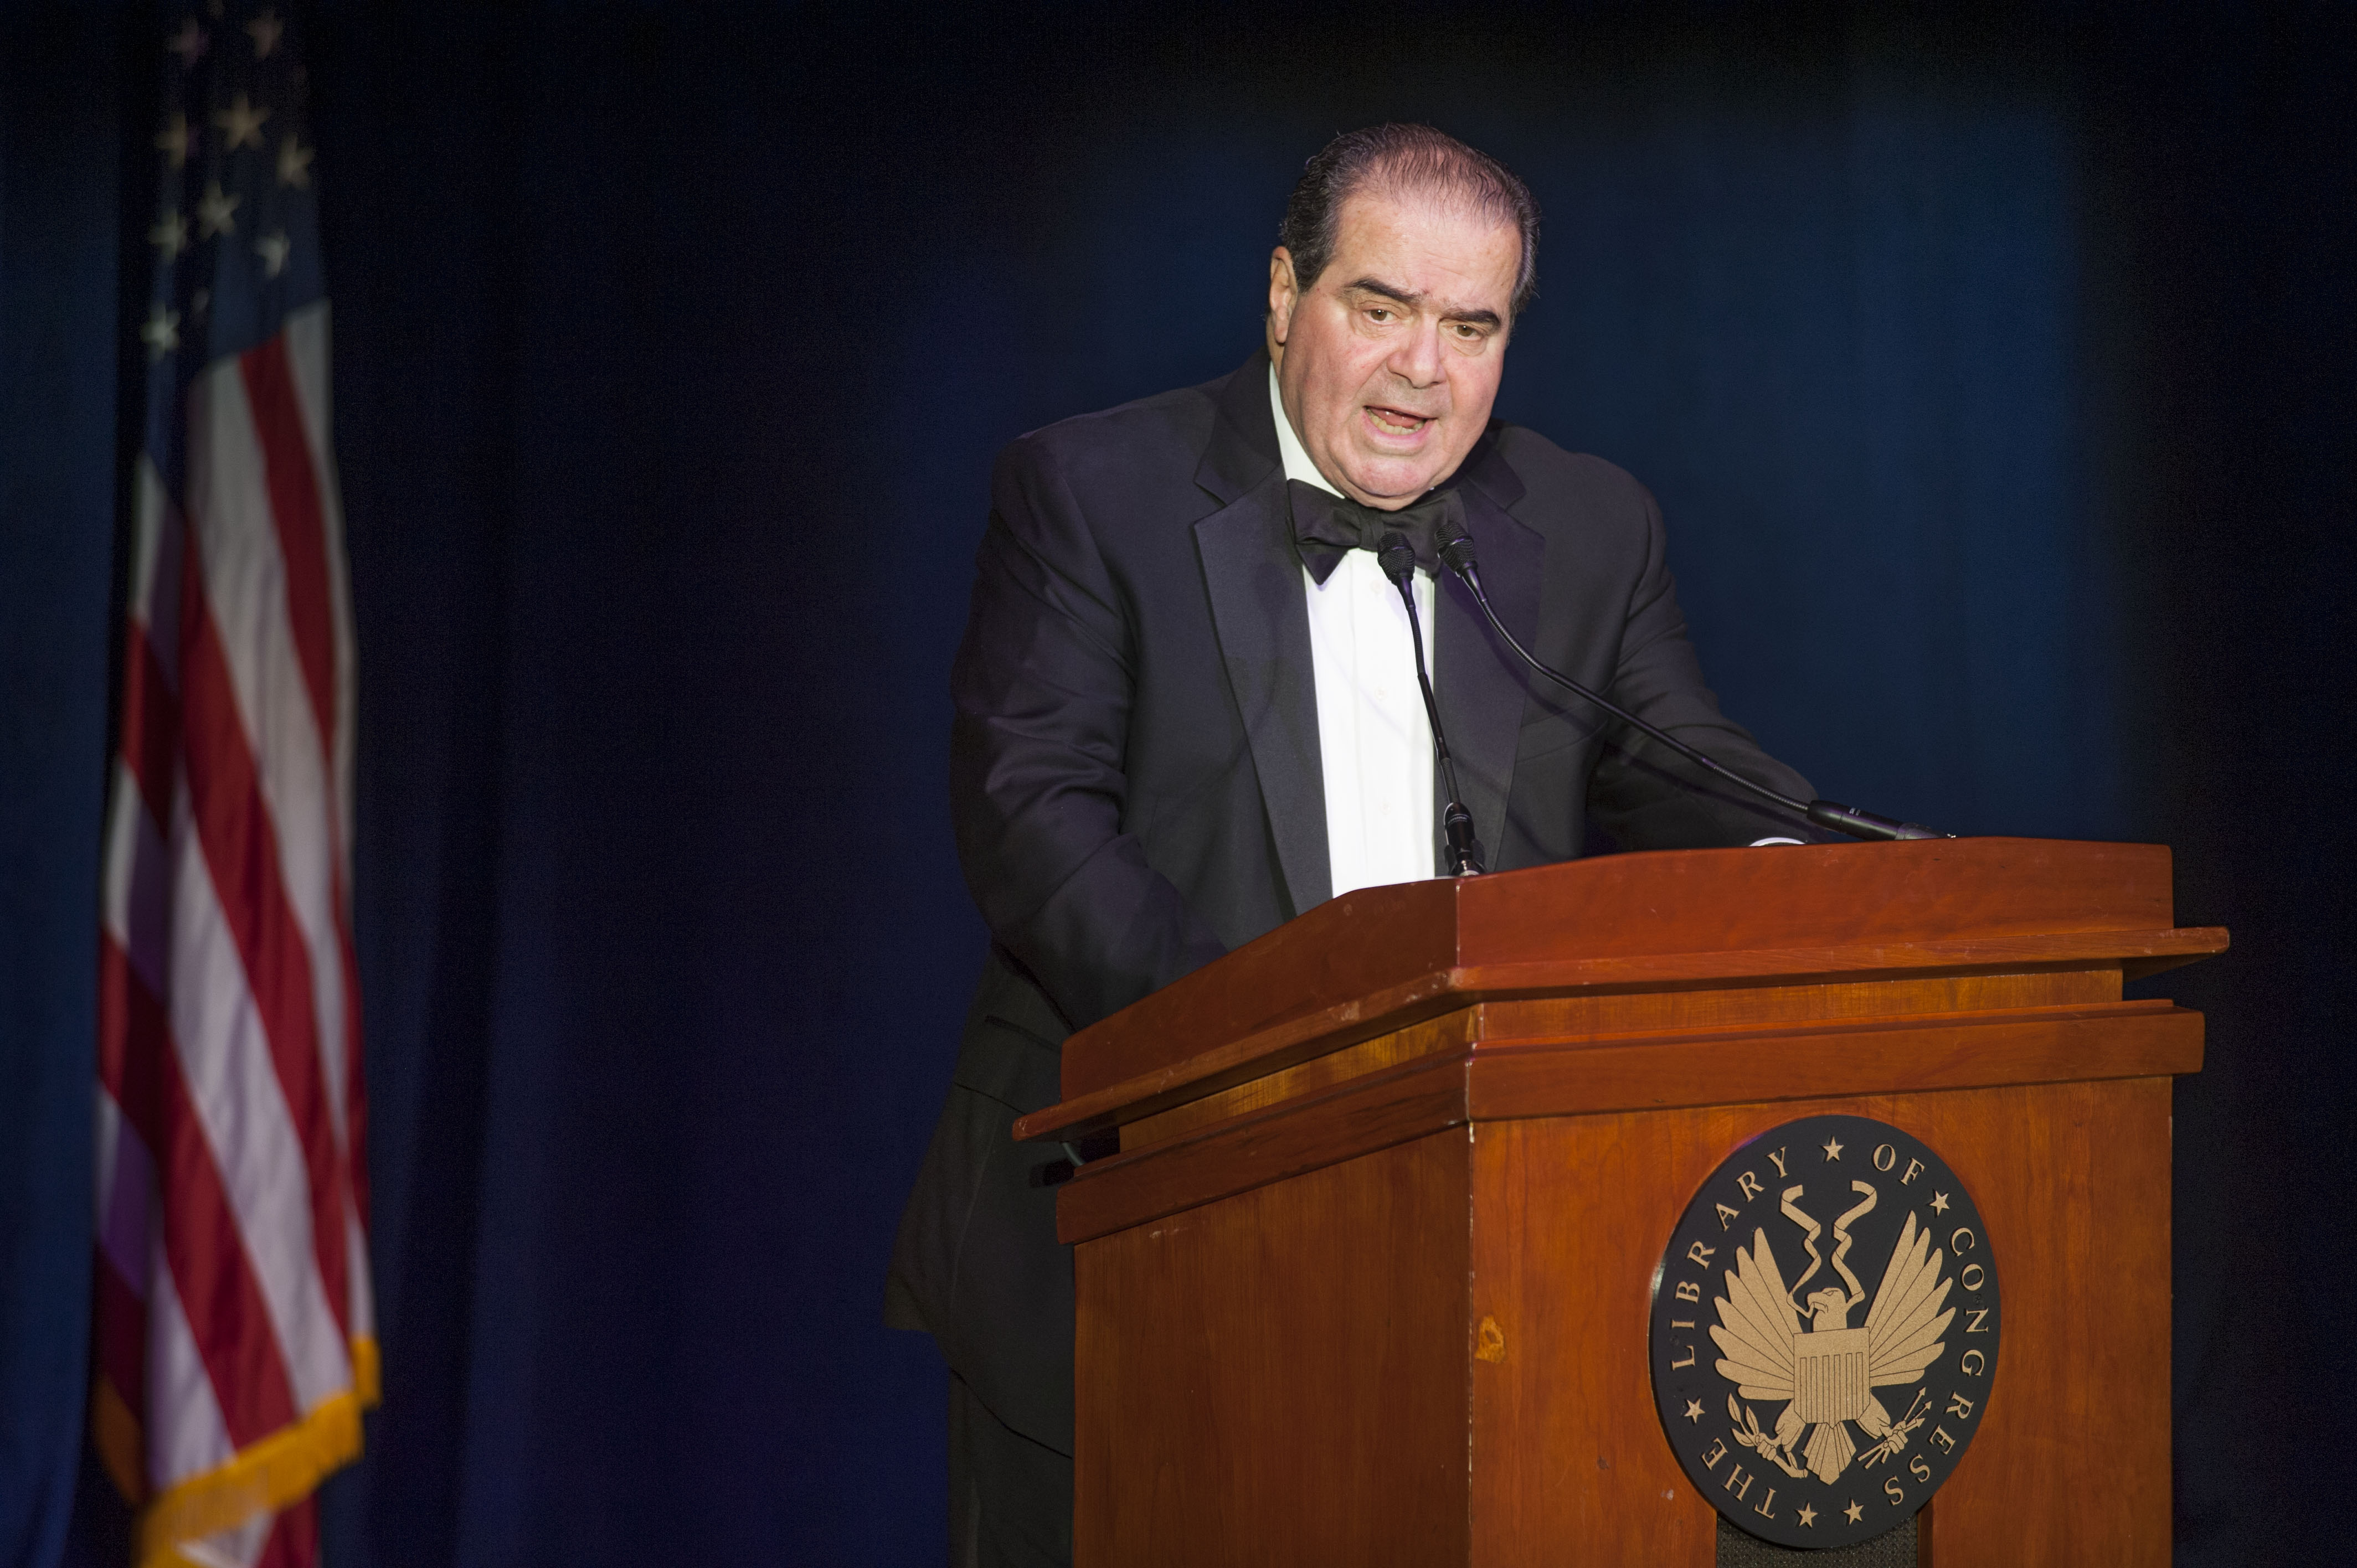 Justice Antonin Scalia at the "Magna Carta: Muse and Mentor" evening program at the Library of Congress on Nov. 6, 2014.